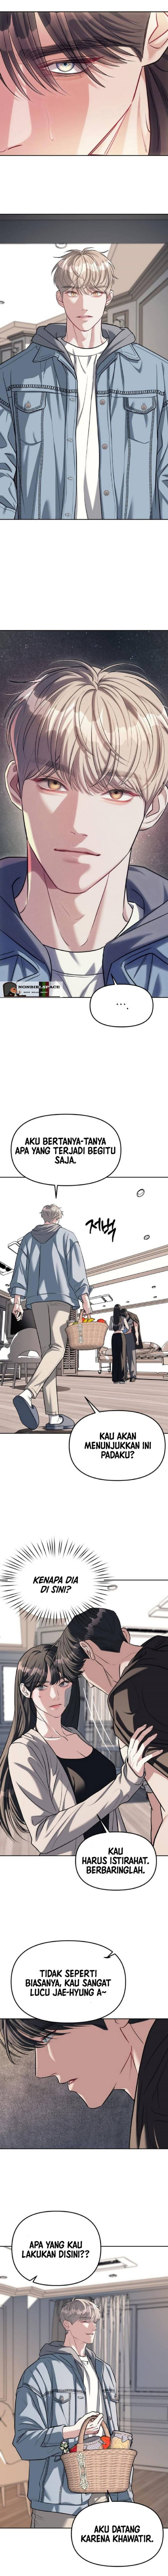 Undercover! Chaebol High School Chapter 28